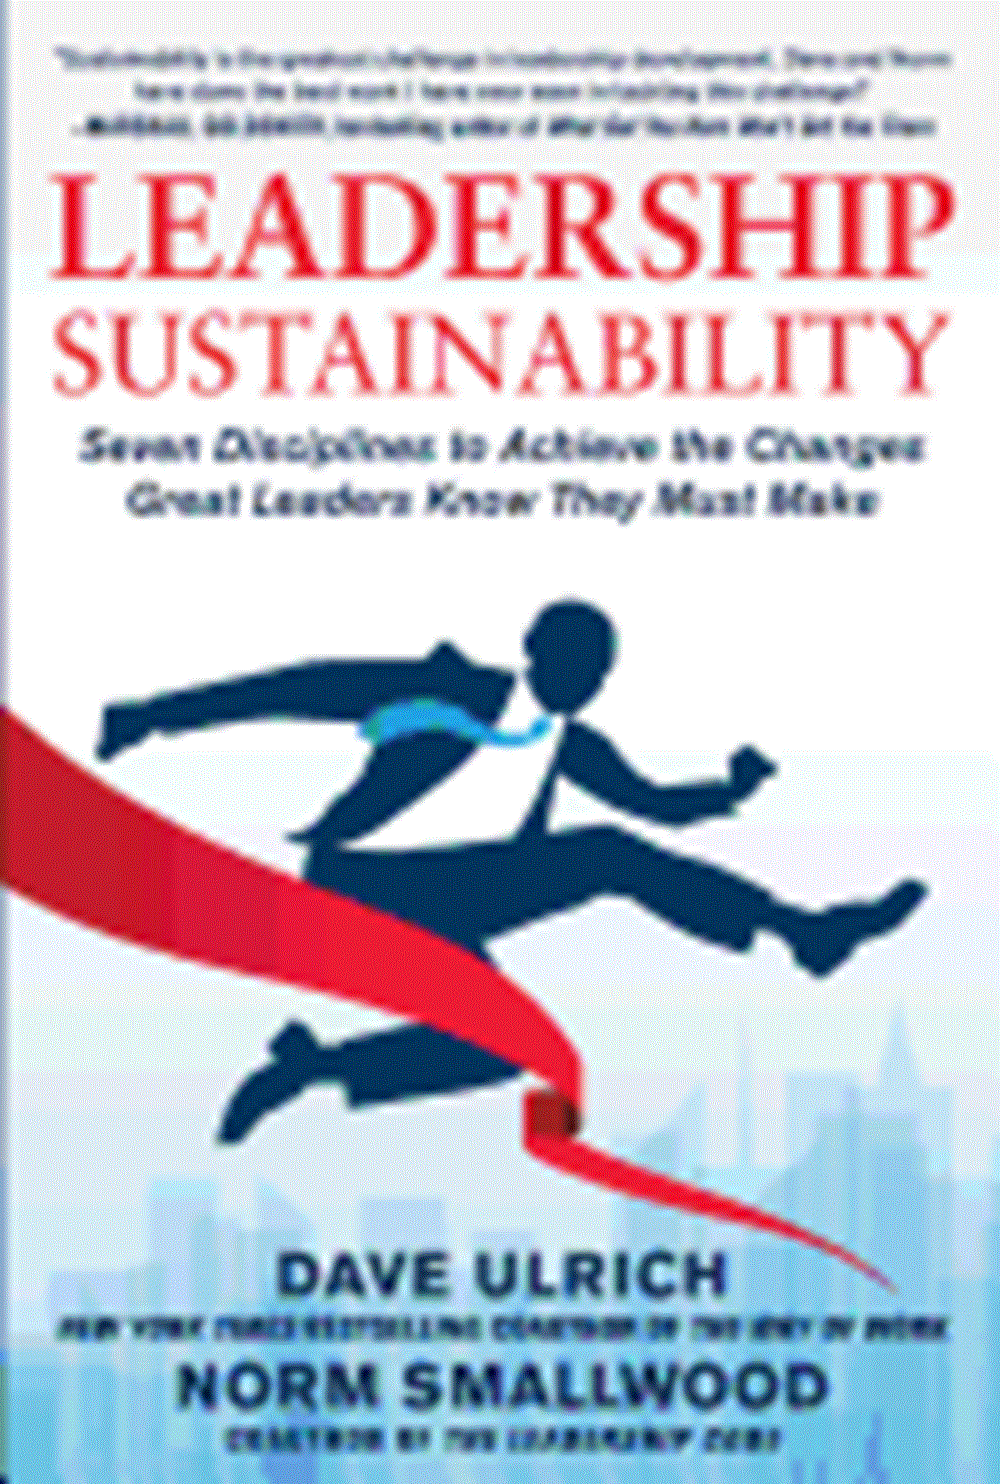 Leadership Sustainability: Seven Disciplines to Achieve the Changes Great Leaders Know They Must Mak